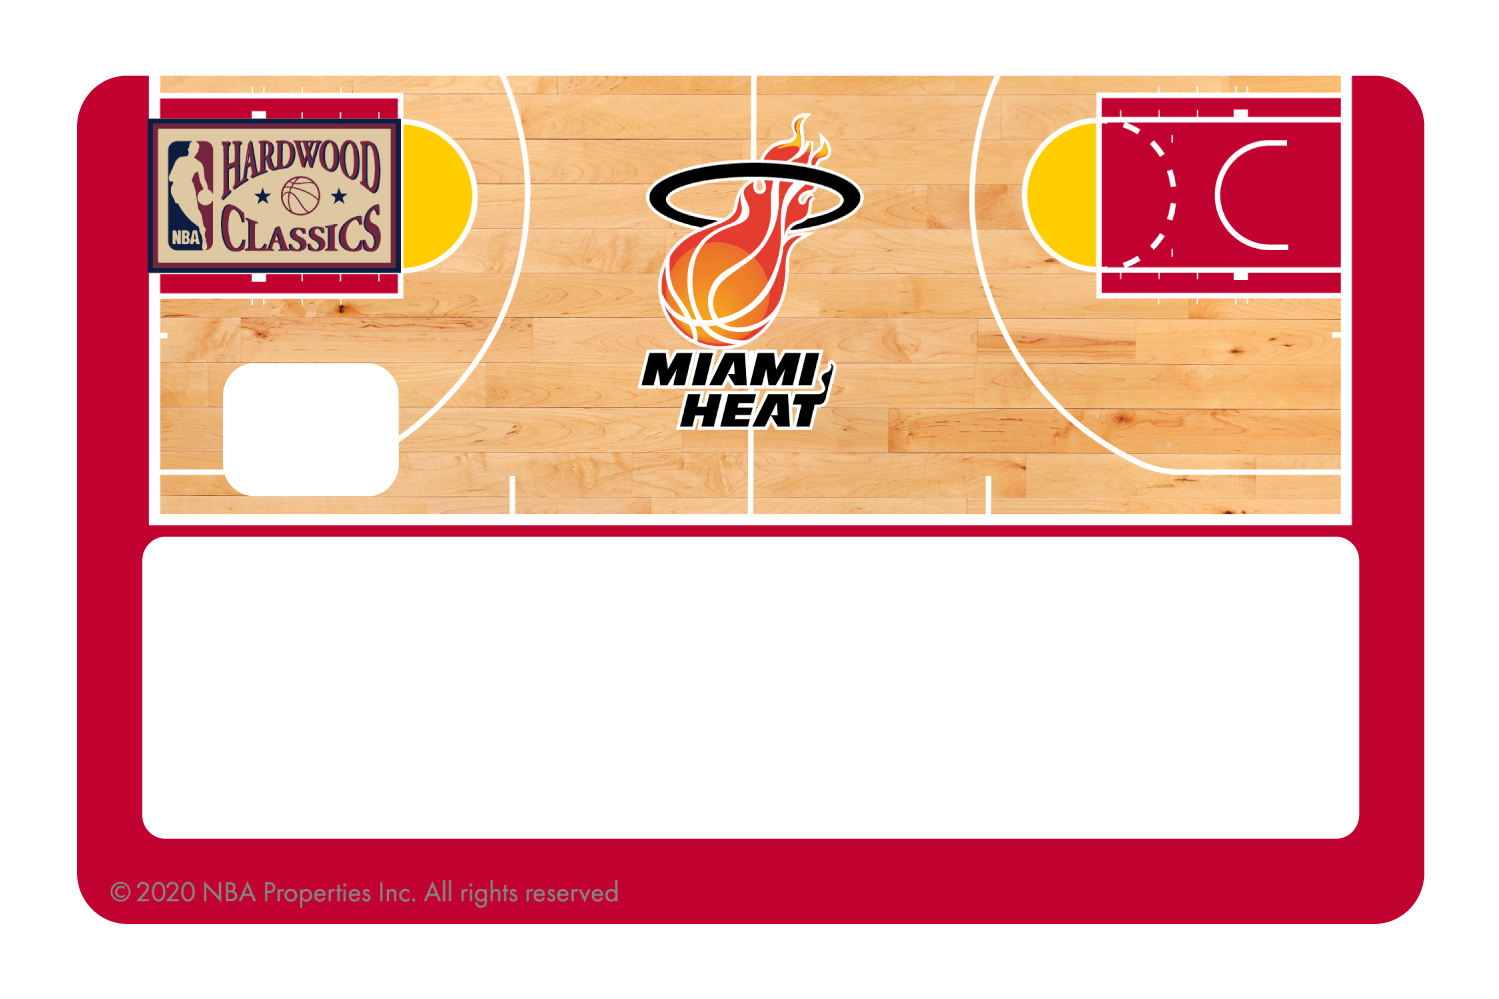 Credit Debit Card Skins | Cucu Covers - Customize Any Bank Card - Miami Heat: Throwback Hardwood Classics Full Cover / Small Chip